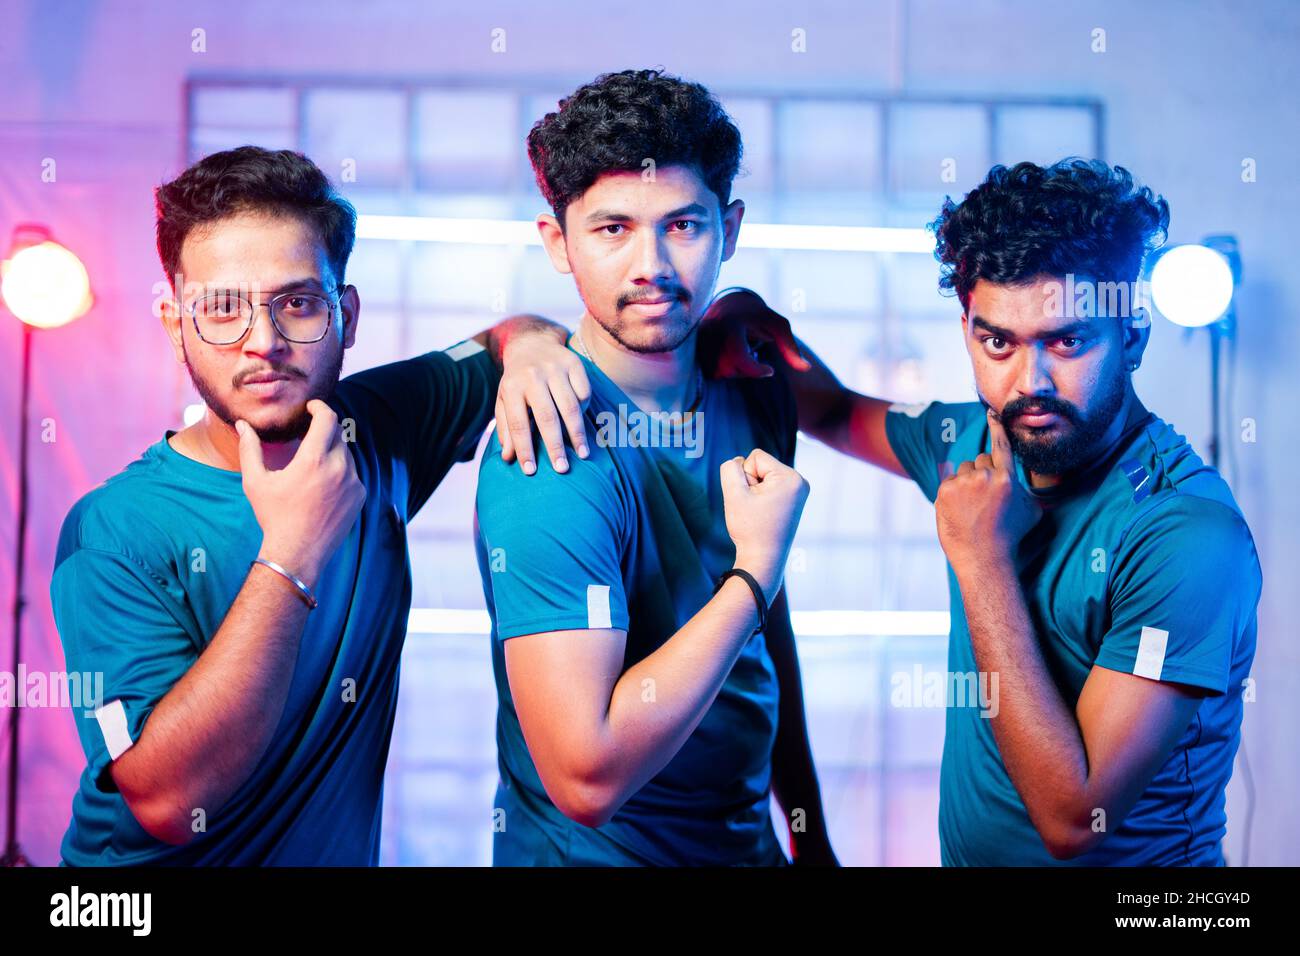 Team of professional gamer on stage or arena in attitude by showing different hand gestures while looking at camera during championship tournment on Stock Photo